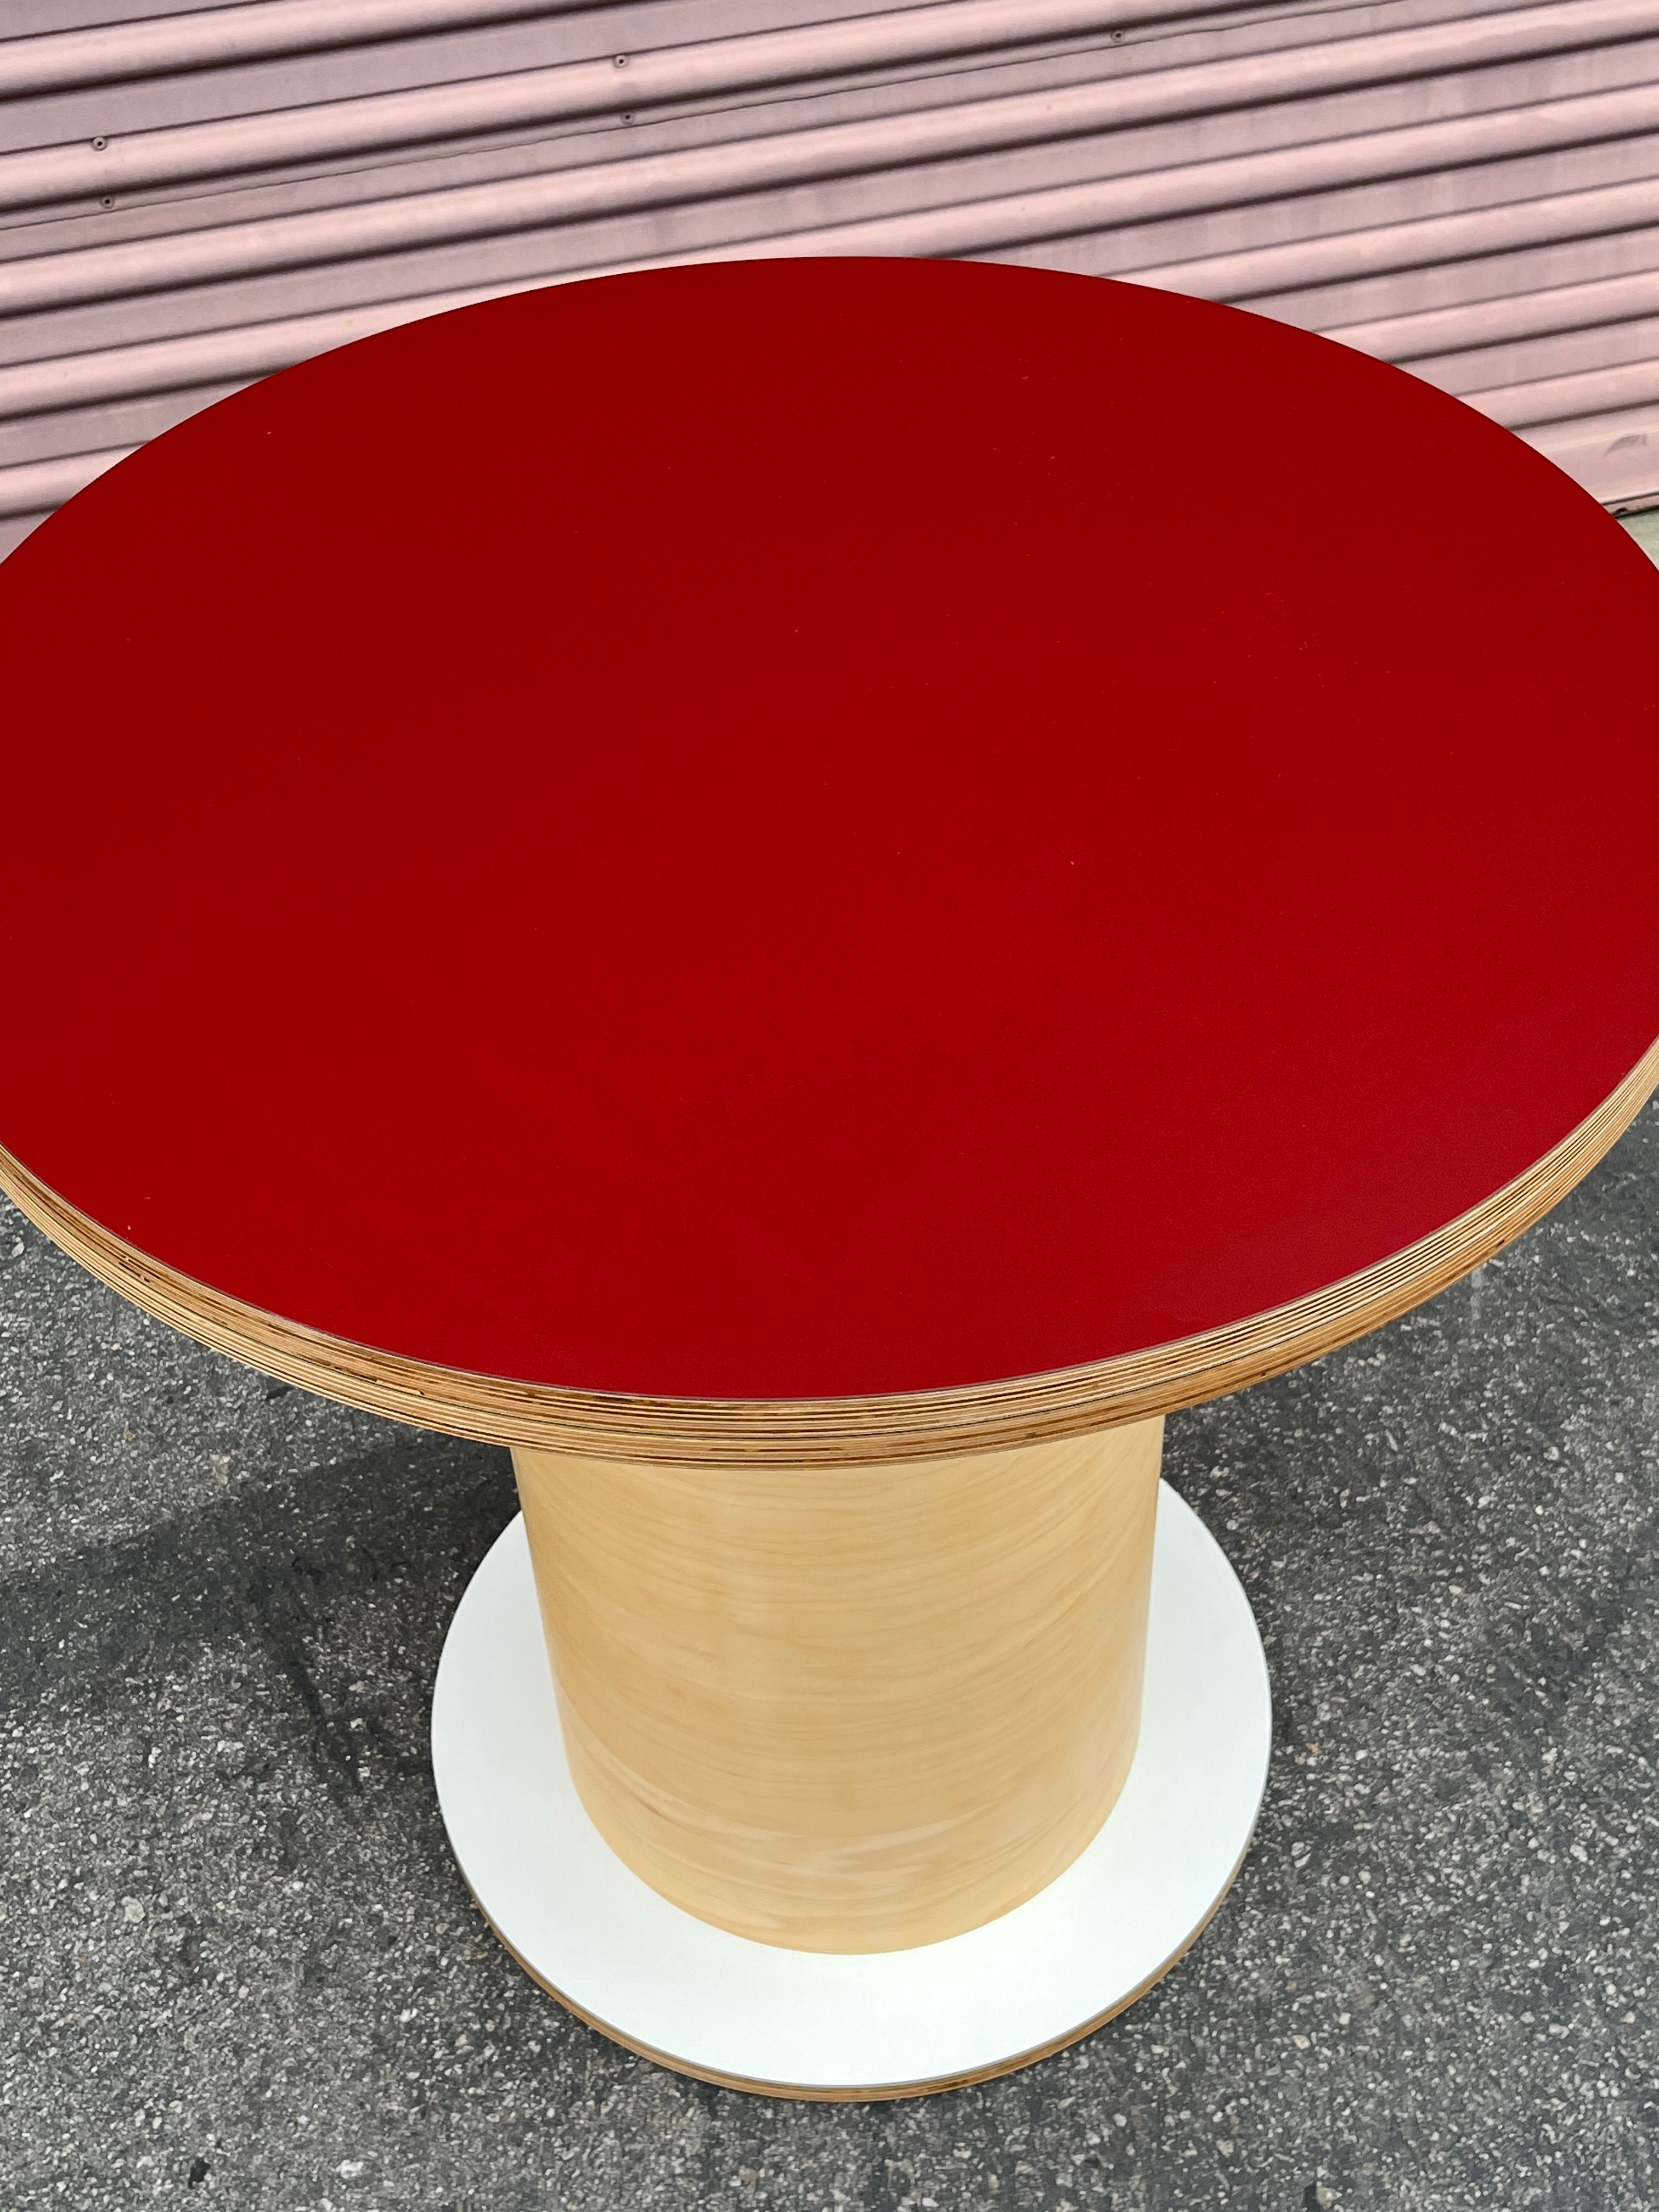  Round Pedestal Table product image 3